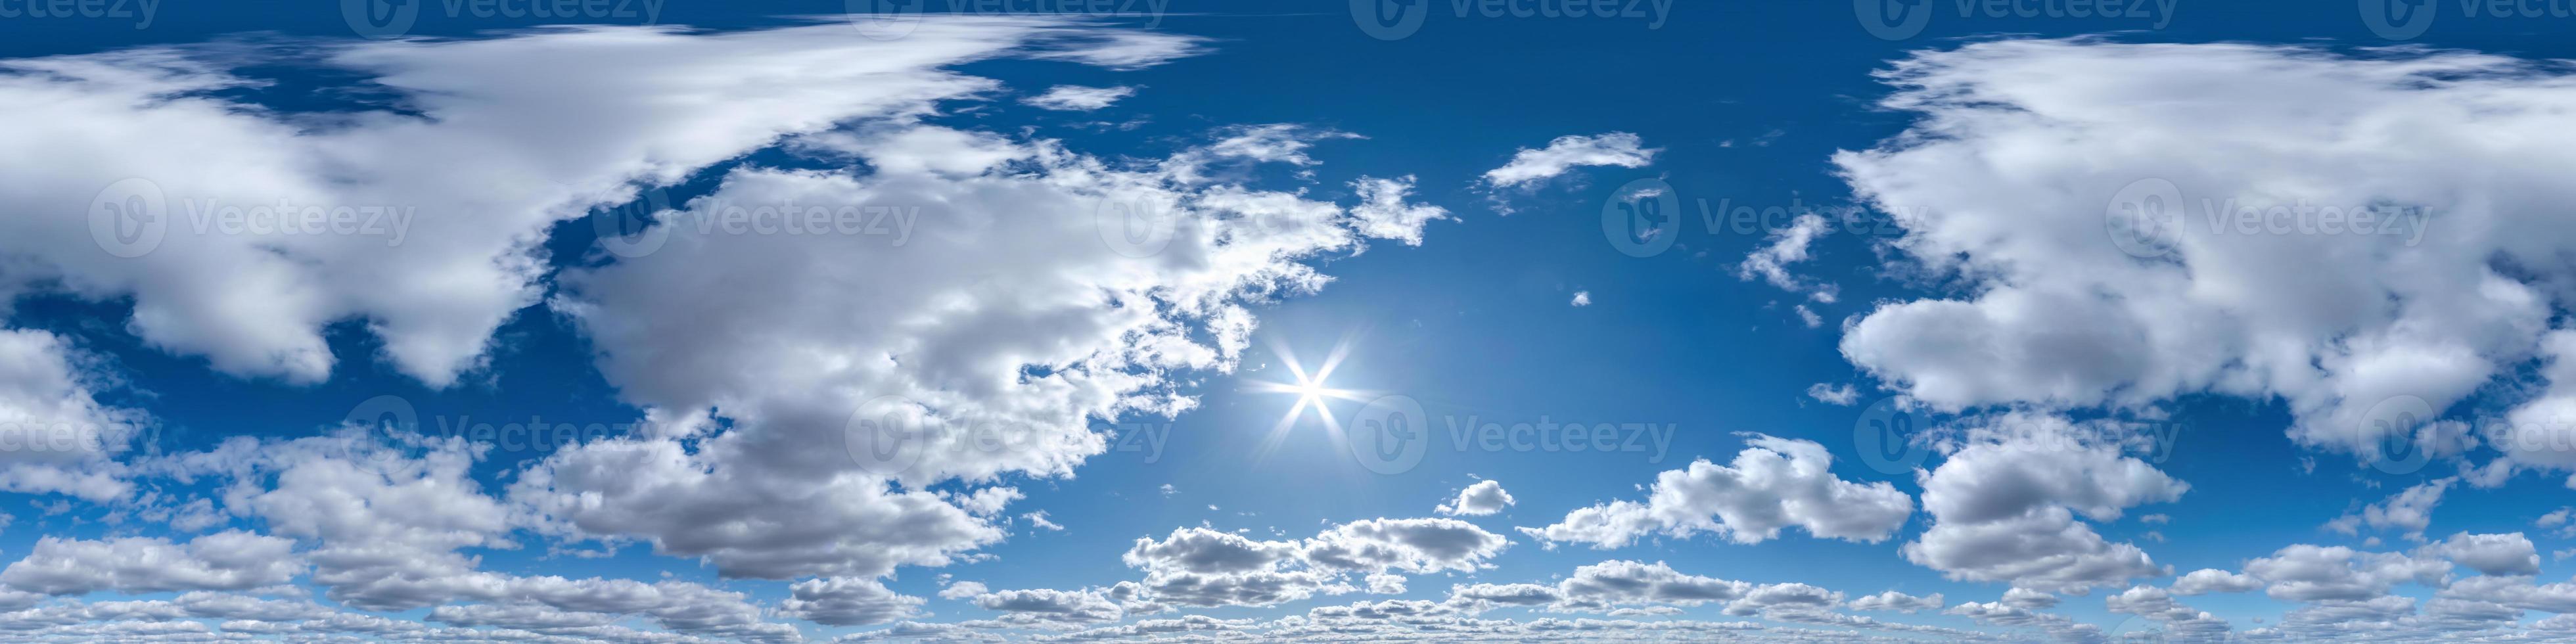 clear blue sky with white beautiful clouds. Seamless hdri panorama 360 degrees angle view  with zenith for use in 3d graphics or game development as sky dome or edit drone shot photo